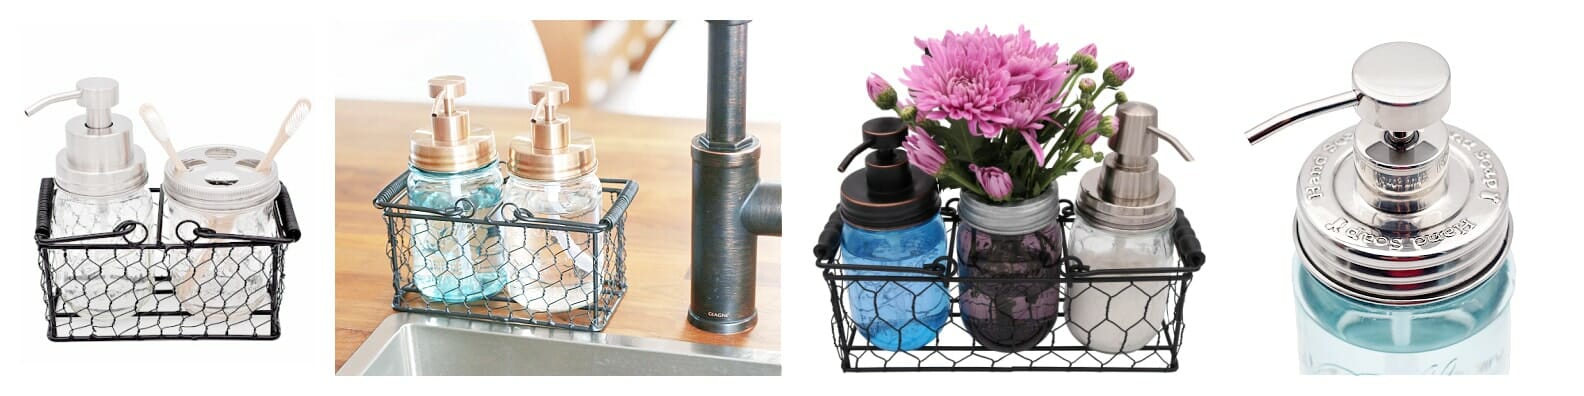 Mason Jar Lifestyle 20 Must-Have Mason Jar Kitchen Accessories best top need useful soap pump foaming dish hand lotion hand sanitizer frog flower lid flowers caddy blog